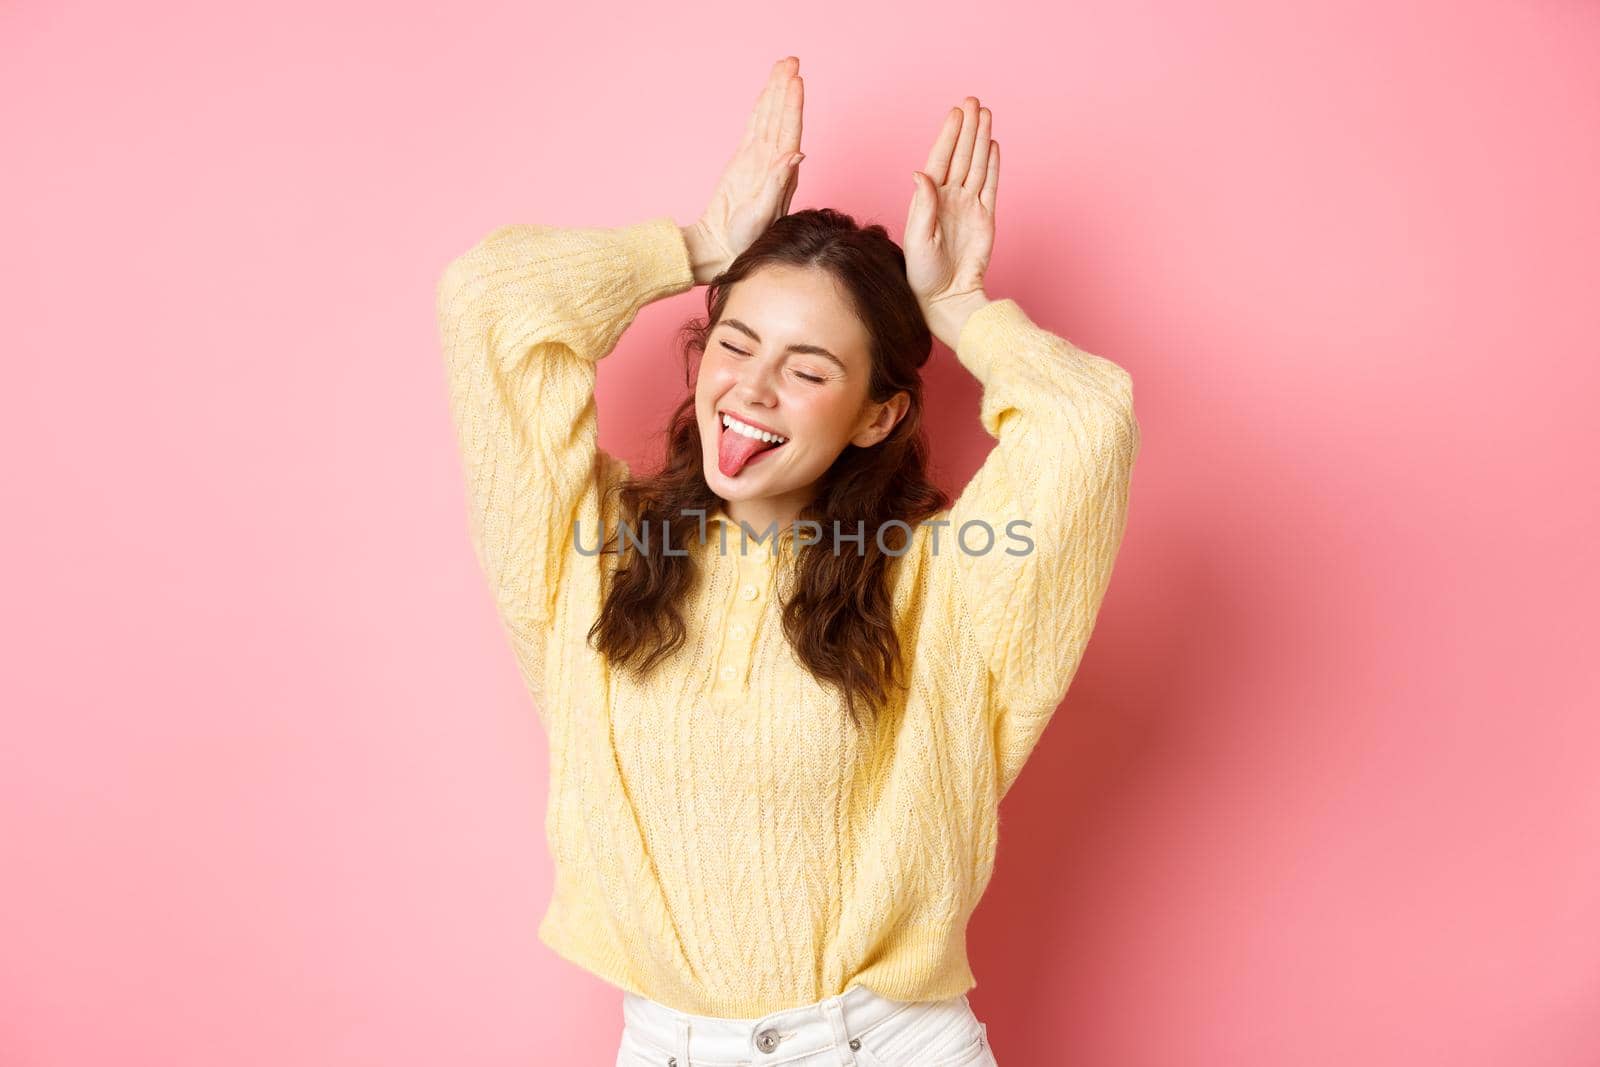 Portrait of funny and cute young woman showing tongue, smiling happy, making easter bunny gesture, standing against pink background.